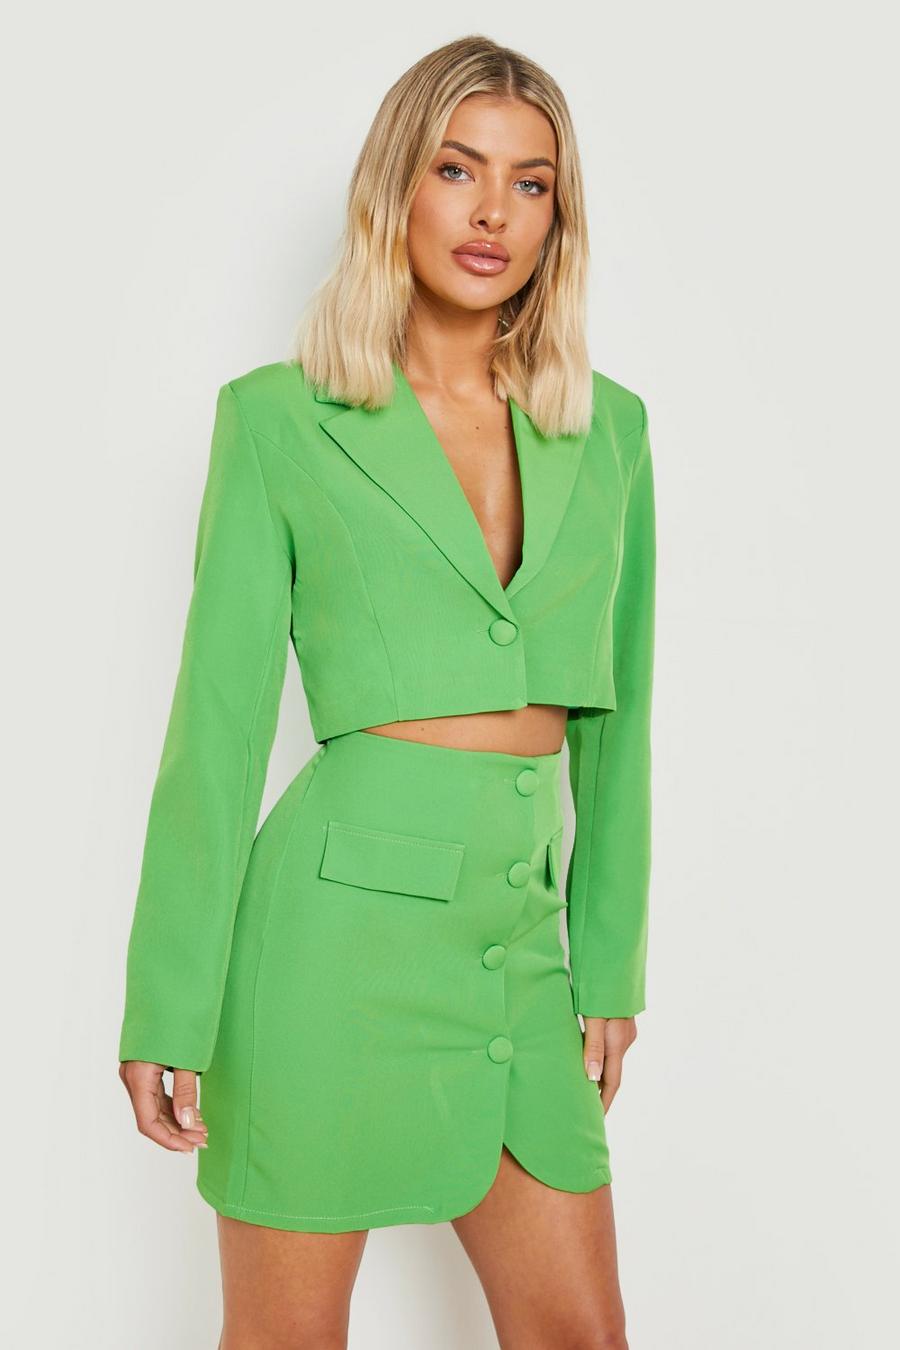 Apple green Cropped Fitted Tailored Blazer